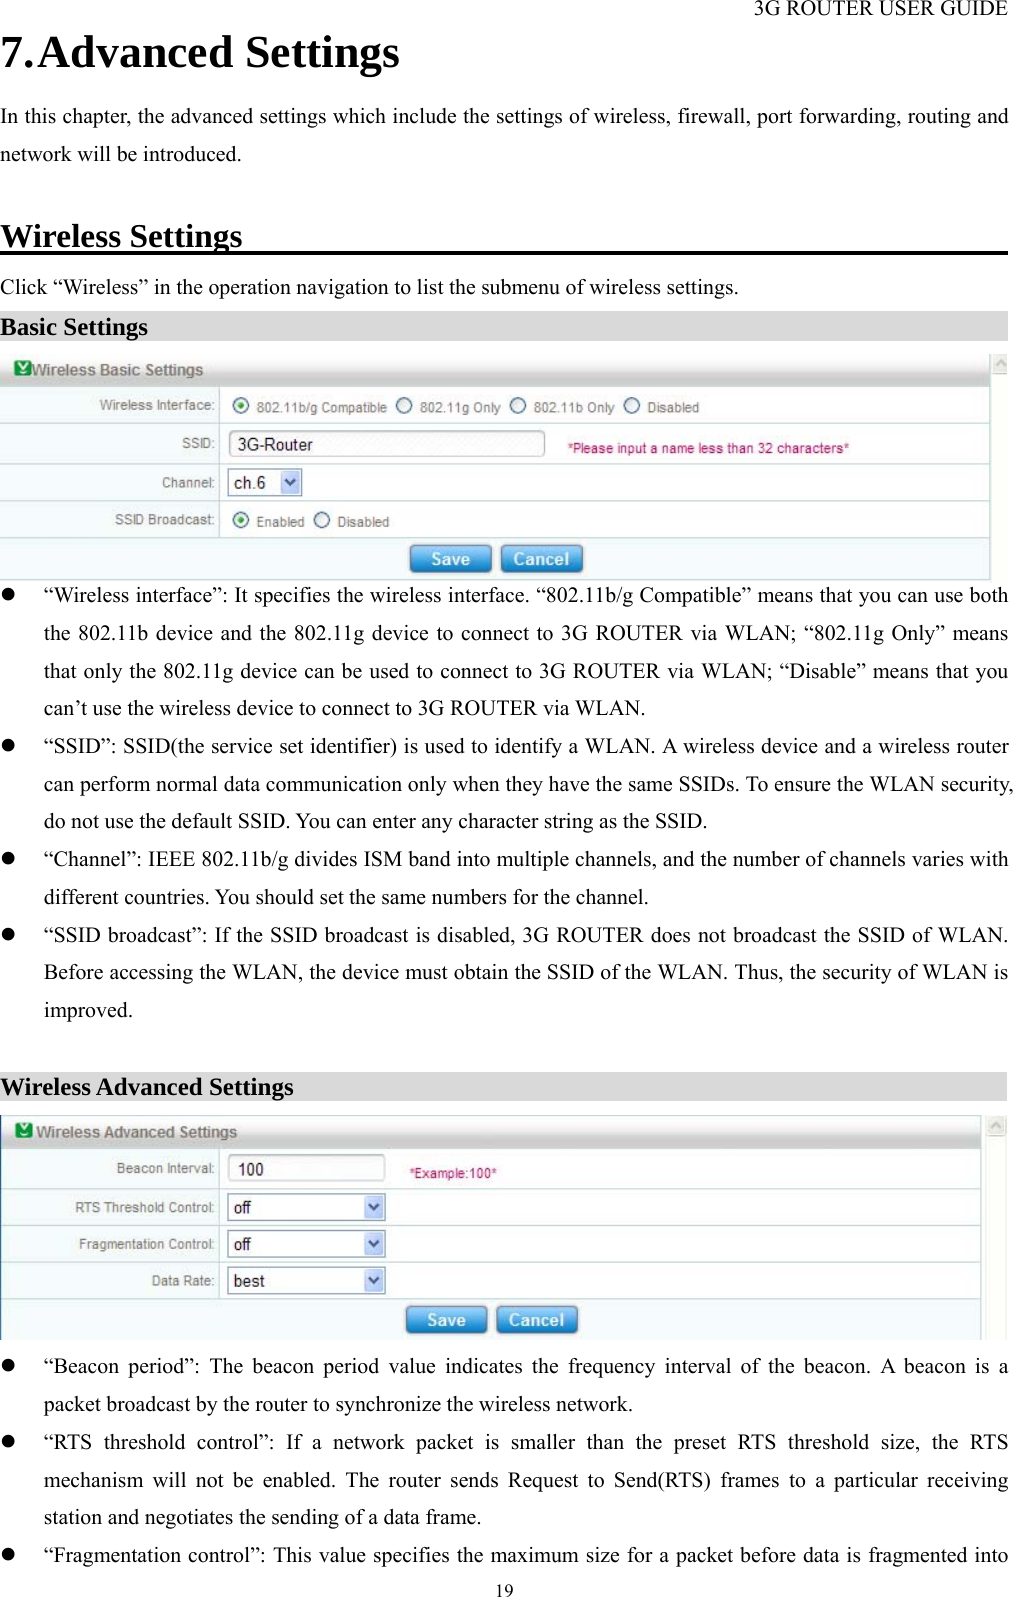 3G ROUTER USER GUIDE  197. Advanced Settings In this chapter, the advanced settings which include the settings of wireless, firewall, port forwarding, routing and network will be introduced.  Wireless Settings                                               Click “Wireless” in the operation navigation to list the submenu of wireless settings. Basic Settings                                                                        z “Wireless interface”: It specifies the wireless interface. “802.11b/g Compatible” means that you can use both the 802.11b device and the 802.11g device to connect to 3G ROUTER via WLAN; “802.11g Only” means that only the 802.11g device can be used to connect to 3G ROUTER via WLAN; “Disable” means that you can’t use the wireless device to connect to 3G ROUTER via WLAN. z “SSID”: SSID(the service set identifier) is used to identify a WLAN. A wireless device and a wireless router can perform normal data communication only when they have the same SSIDs. To ensure the WLAN security, do not use the default SSID. You can enter any character string as the SSID.   z “Channel”: IEEE 802.11b/g divides ISM band into multiple channels, and the number of channels varies with different countries. You should set the same numbers for the channel. z “SSID broadcast”: If the SSID broadcast is disabled, 3G ROUTER does not broadcast the SSID of WLAN. Before accessing the WLAN, the device must obtain the SSID of the WLAN. Thus, the security of WLAN is improved.  Wireless Advanced Settings                                                           z “Beacon period”: The beacon period value indicates the frequency interval of the beacon. A beacon is a packet broadcast by the router to synchronize the wireless network. z “RTS threshold control”: If a network packet is smaller than the preset RTS threshold size, the RTS mechanism will not be enabled. The router sends Request to Send(RTS) frames to a particular receiving station and negotiates the sending of a data frame. z “Fragmentation control”: This value specifies the maximum size for a packet before data is fragmented into 